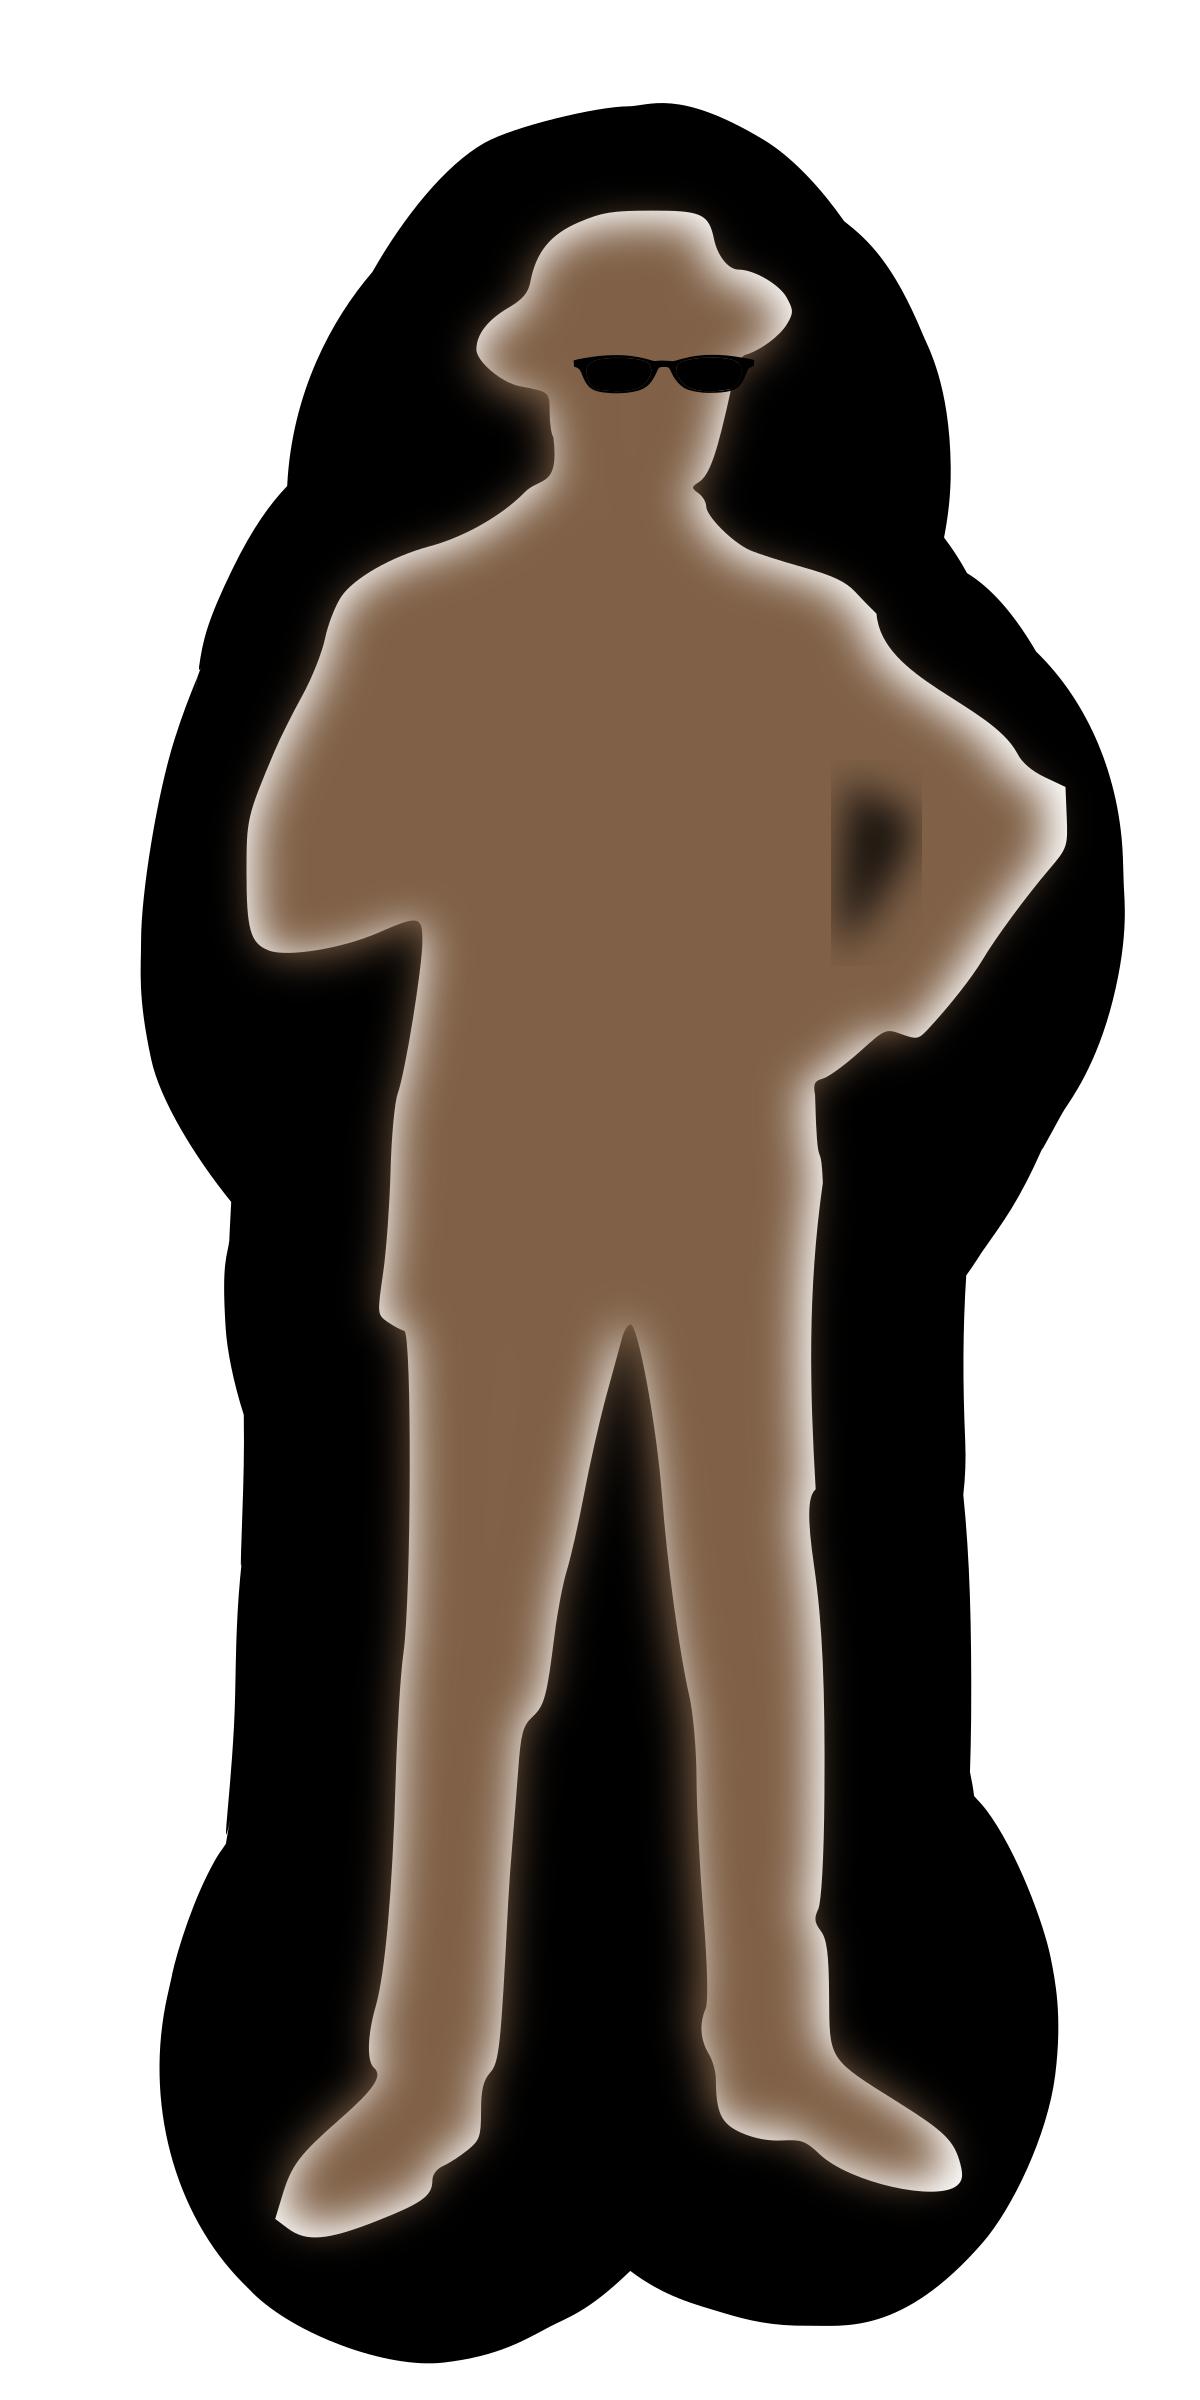 Man-silhouette 01 png